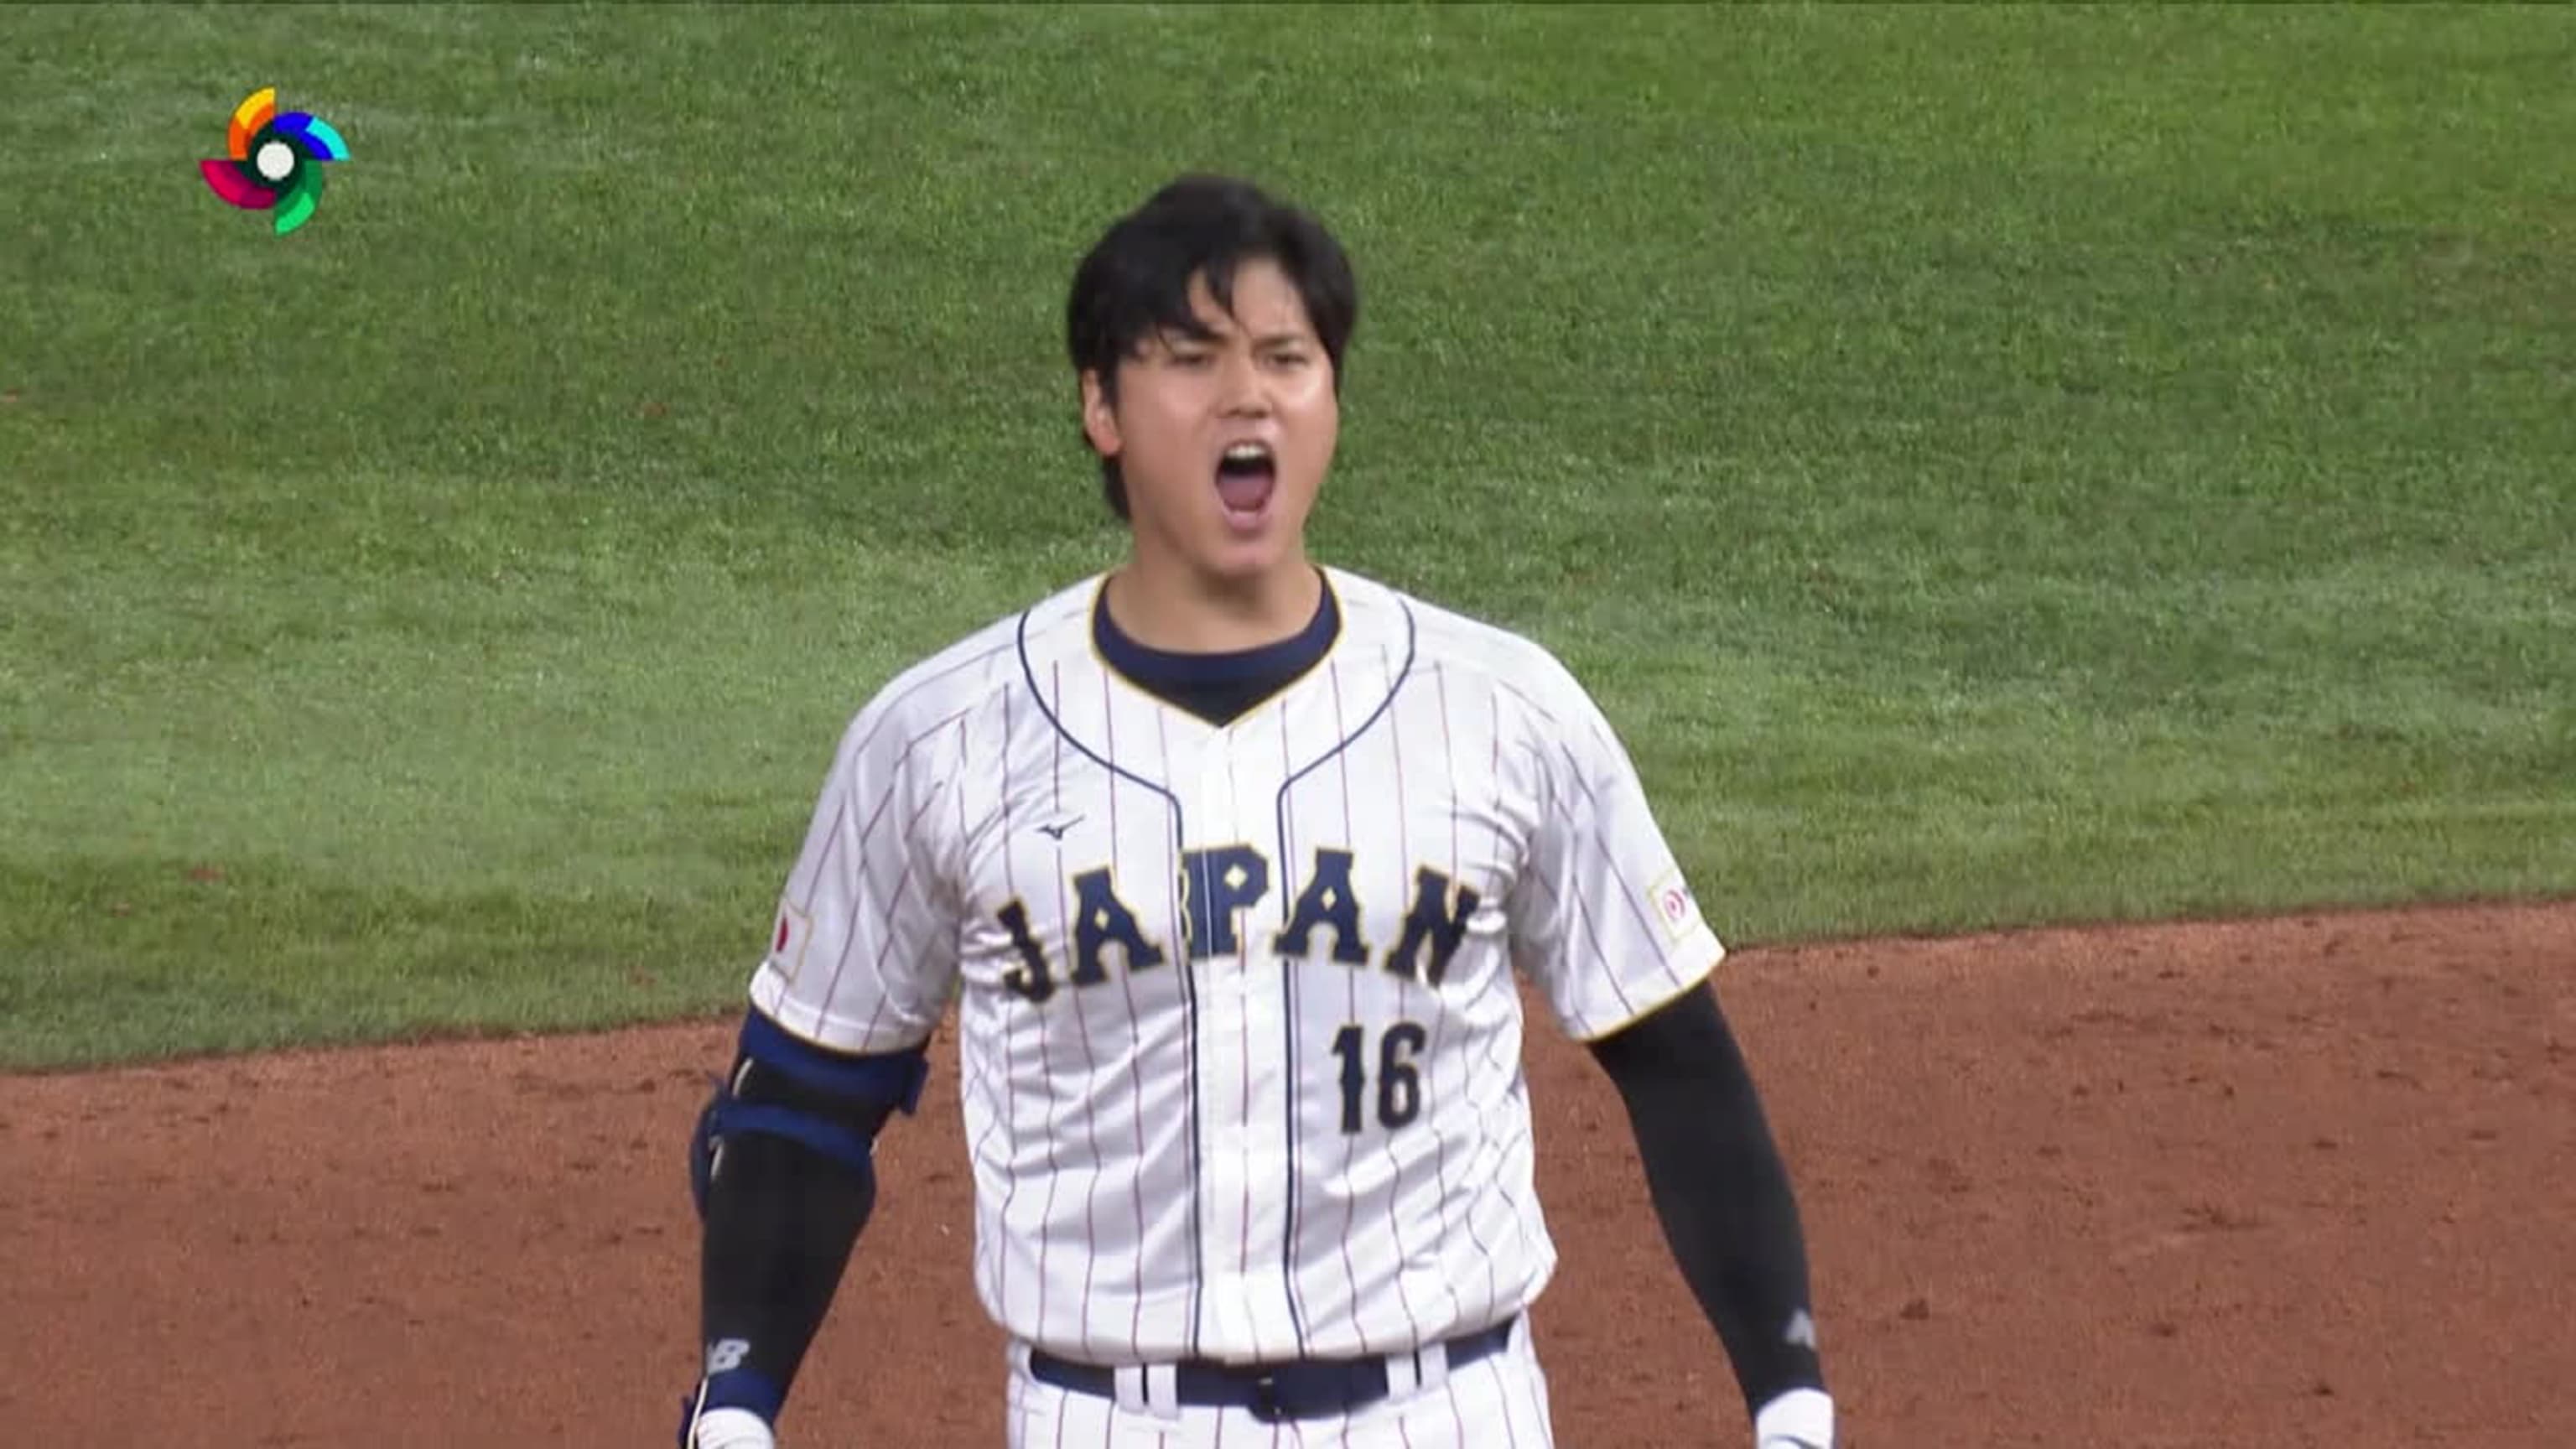 Ohtani leads off 9th with double